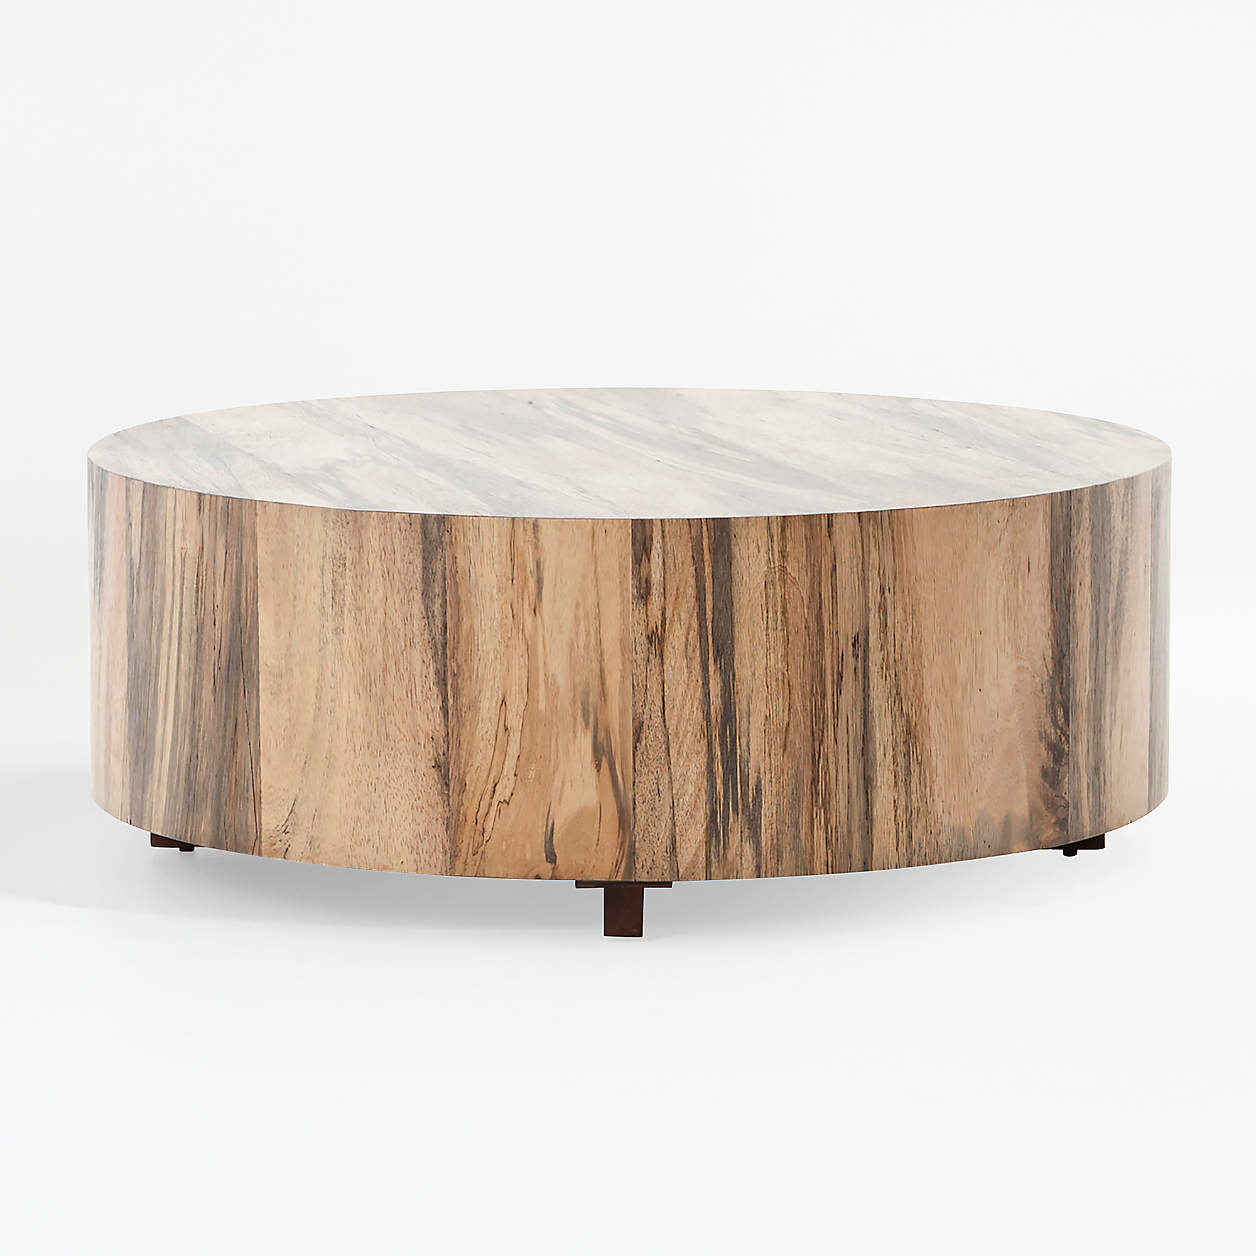 Dillon Spalted Primavera Round Wood Coffee Table